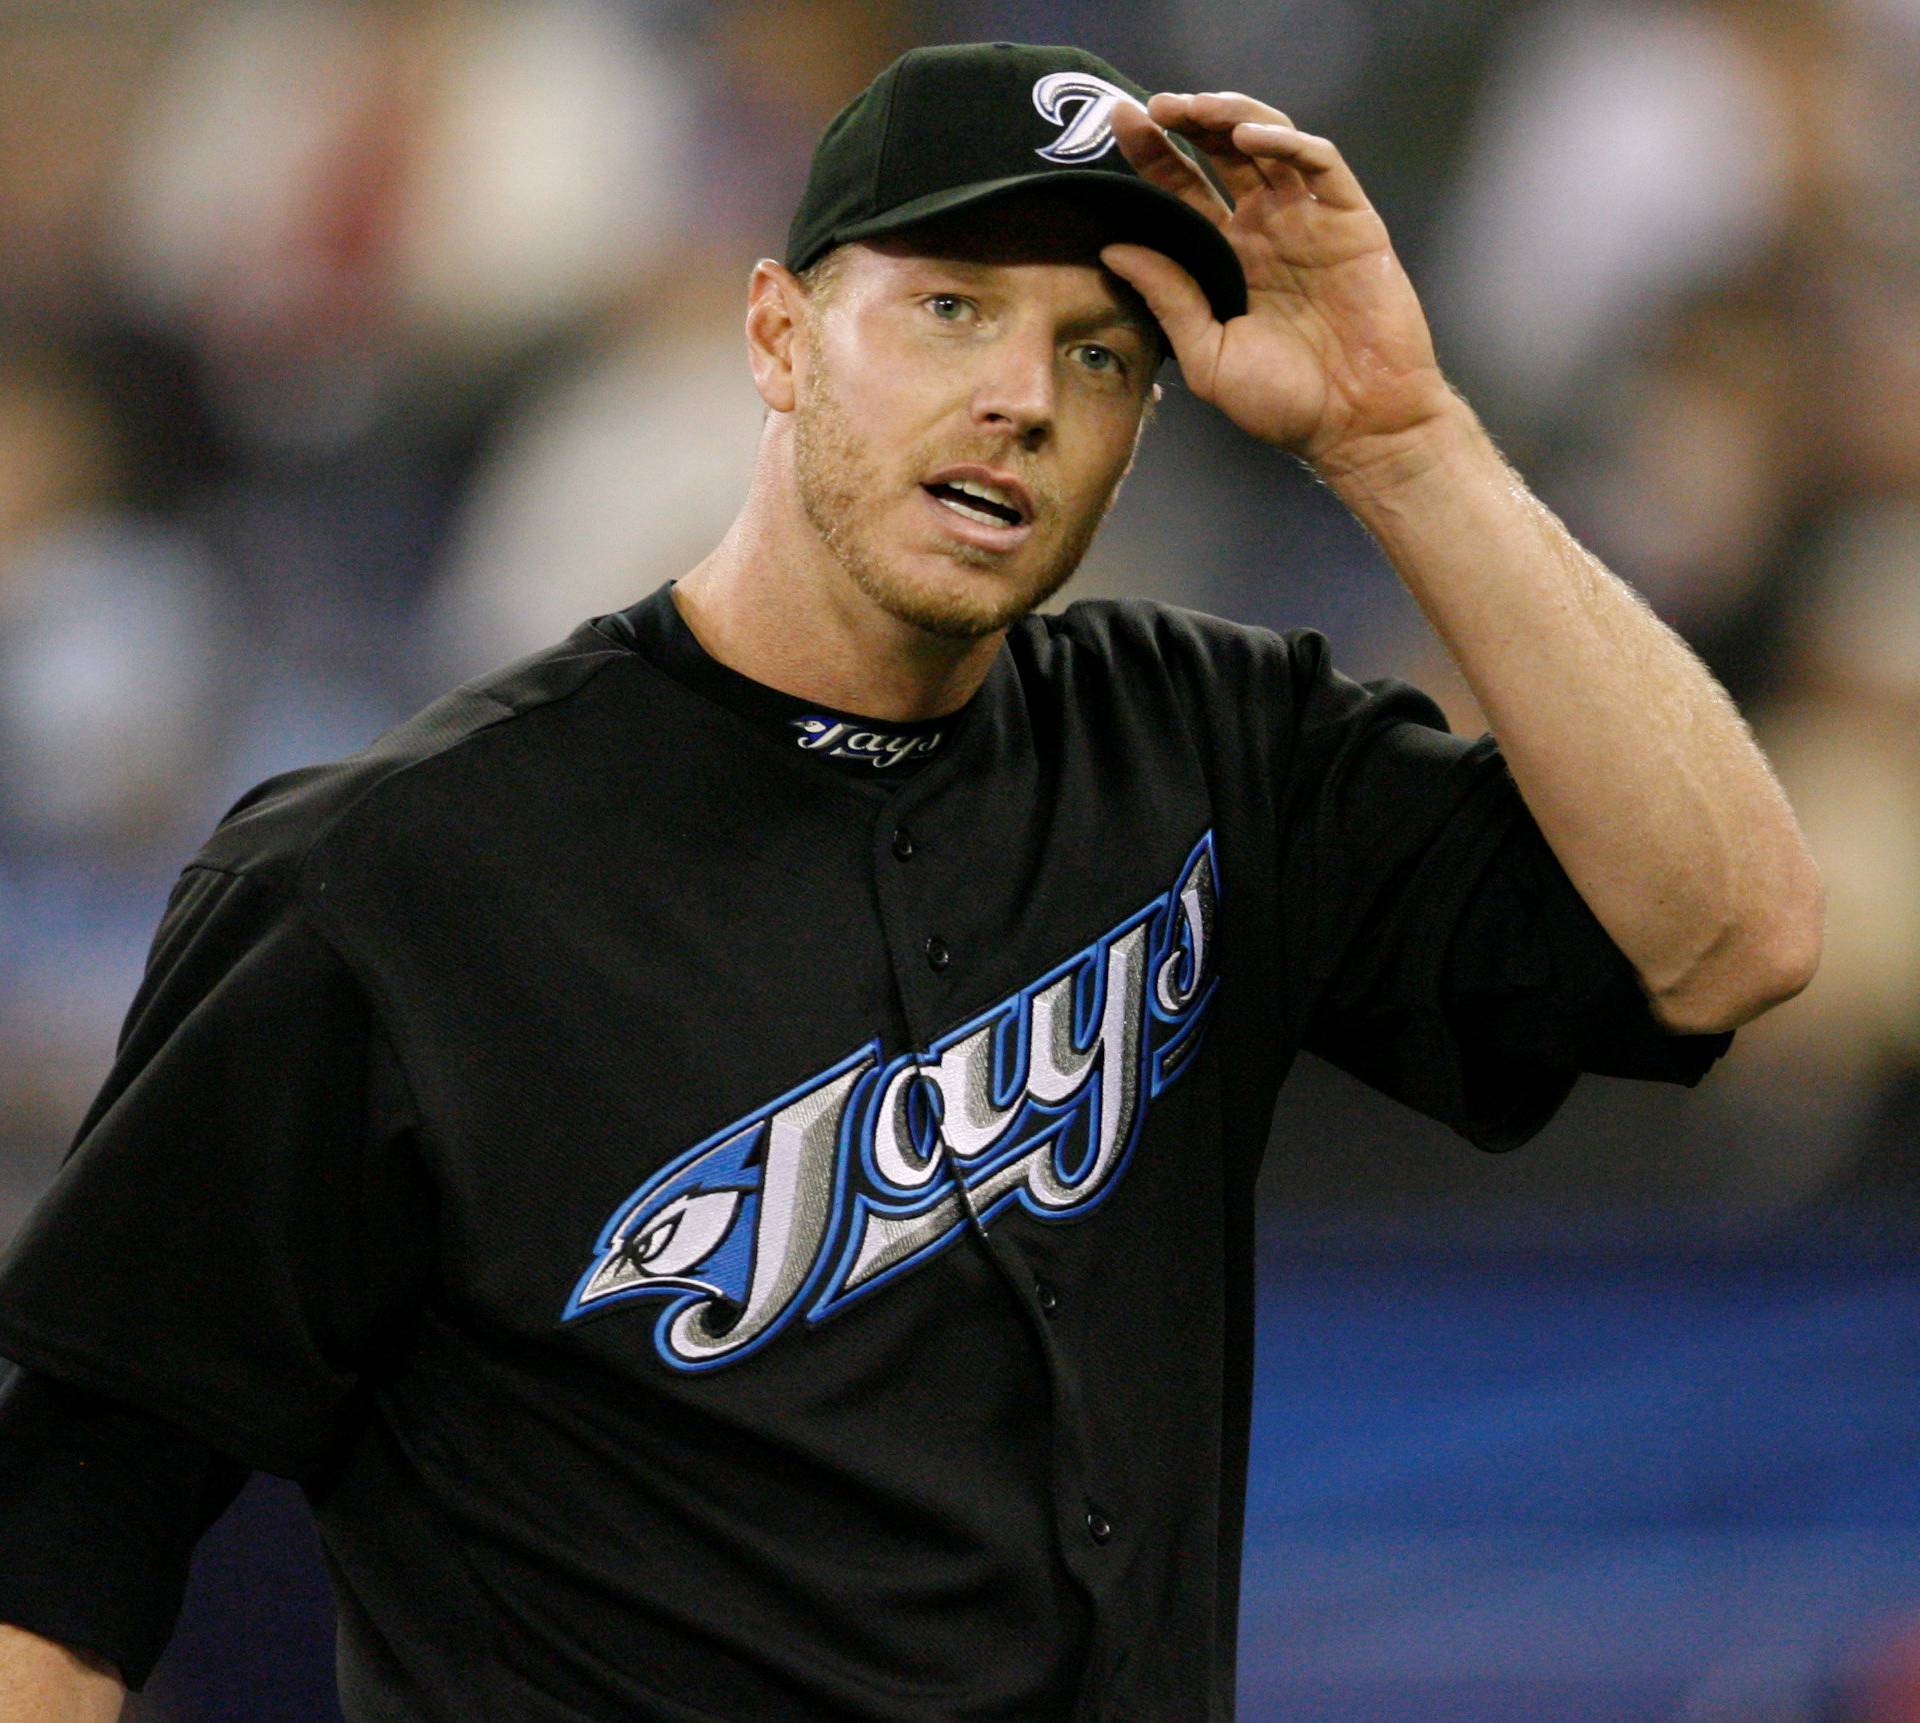 FILE PHOTO: Toronto Blue Jays pitcher Halladay adjusts his cap against the Chicago White Sox in Toronto